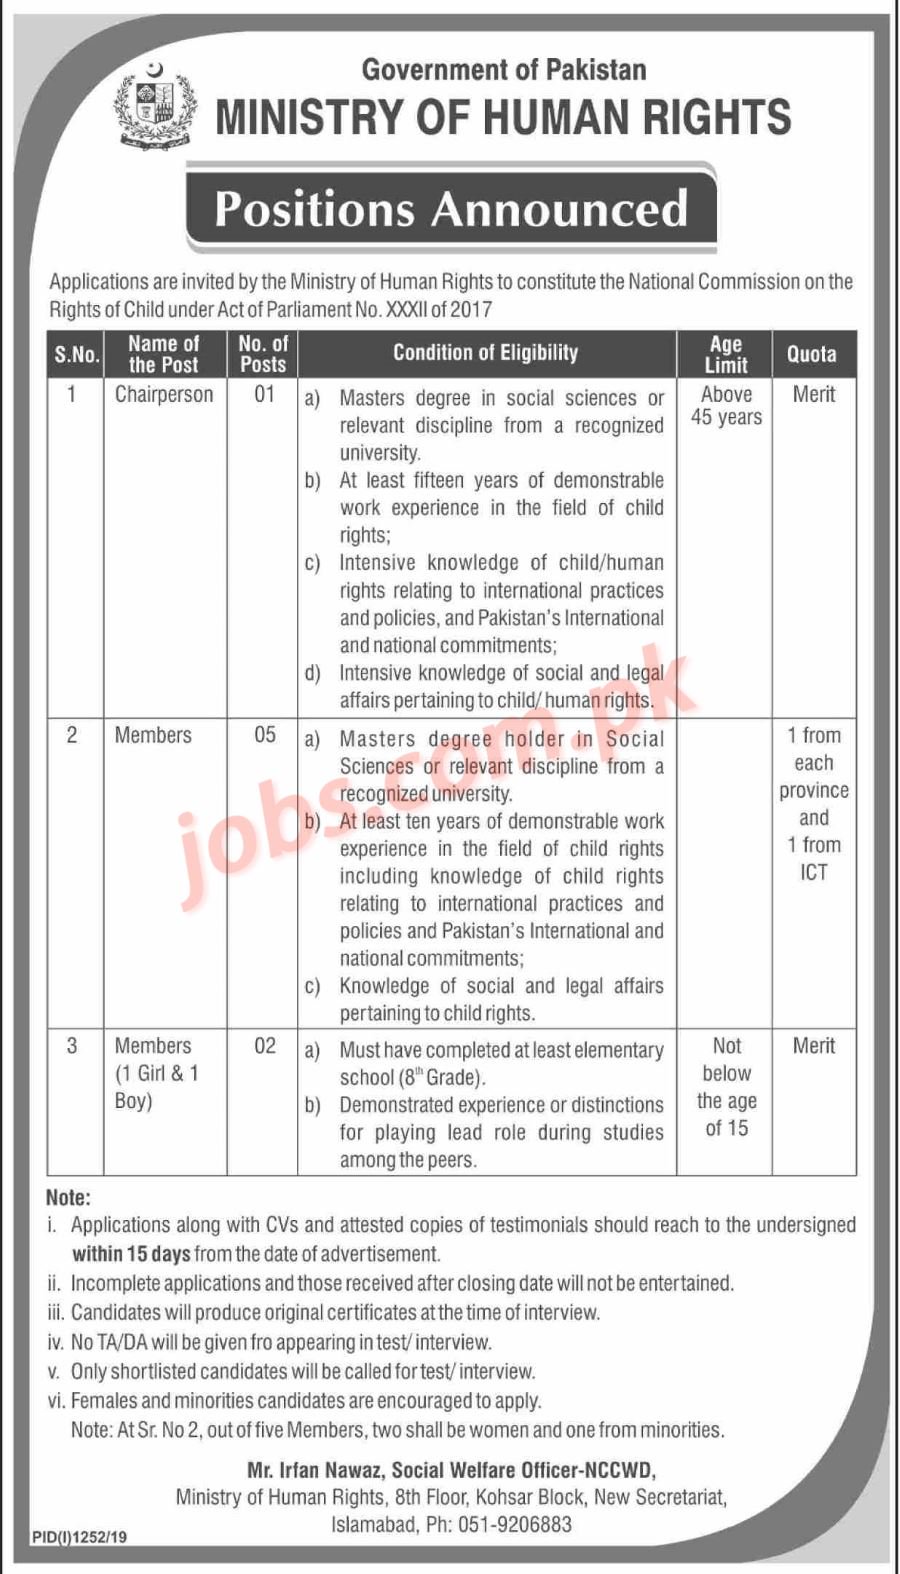 Ministry of Human Rights Pakistan Jobs 2019 for Members and Chairperson